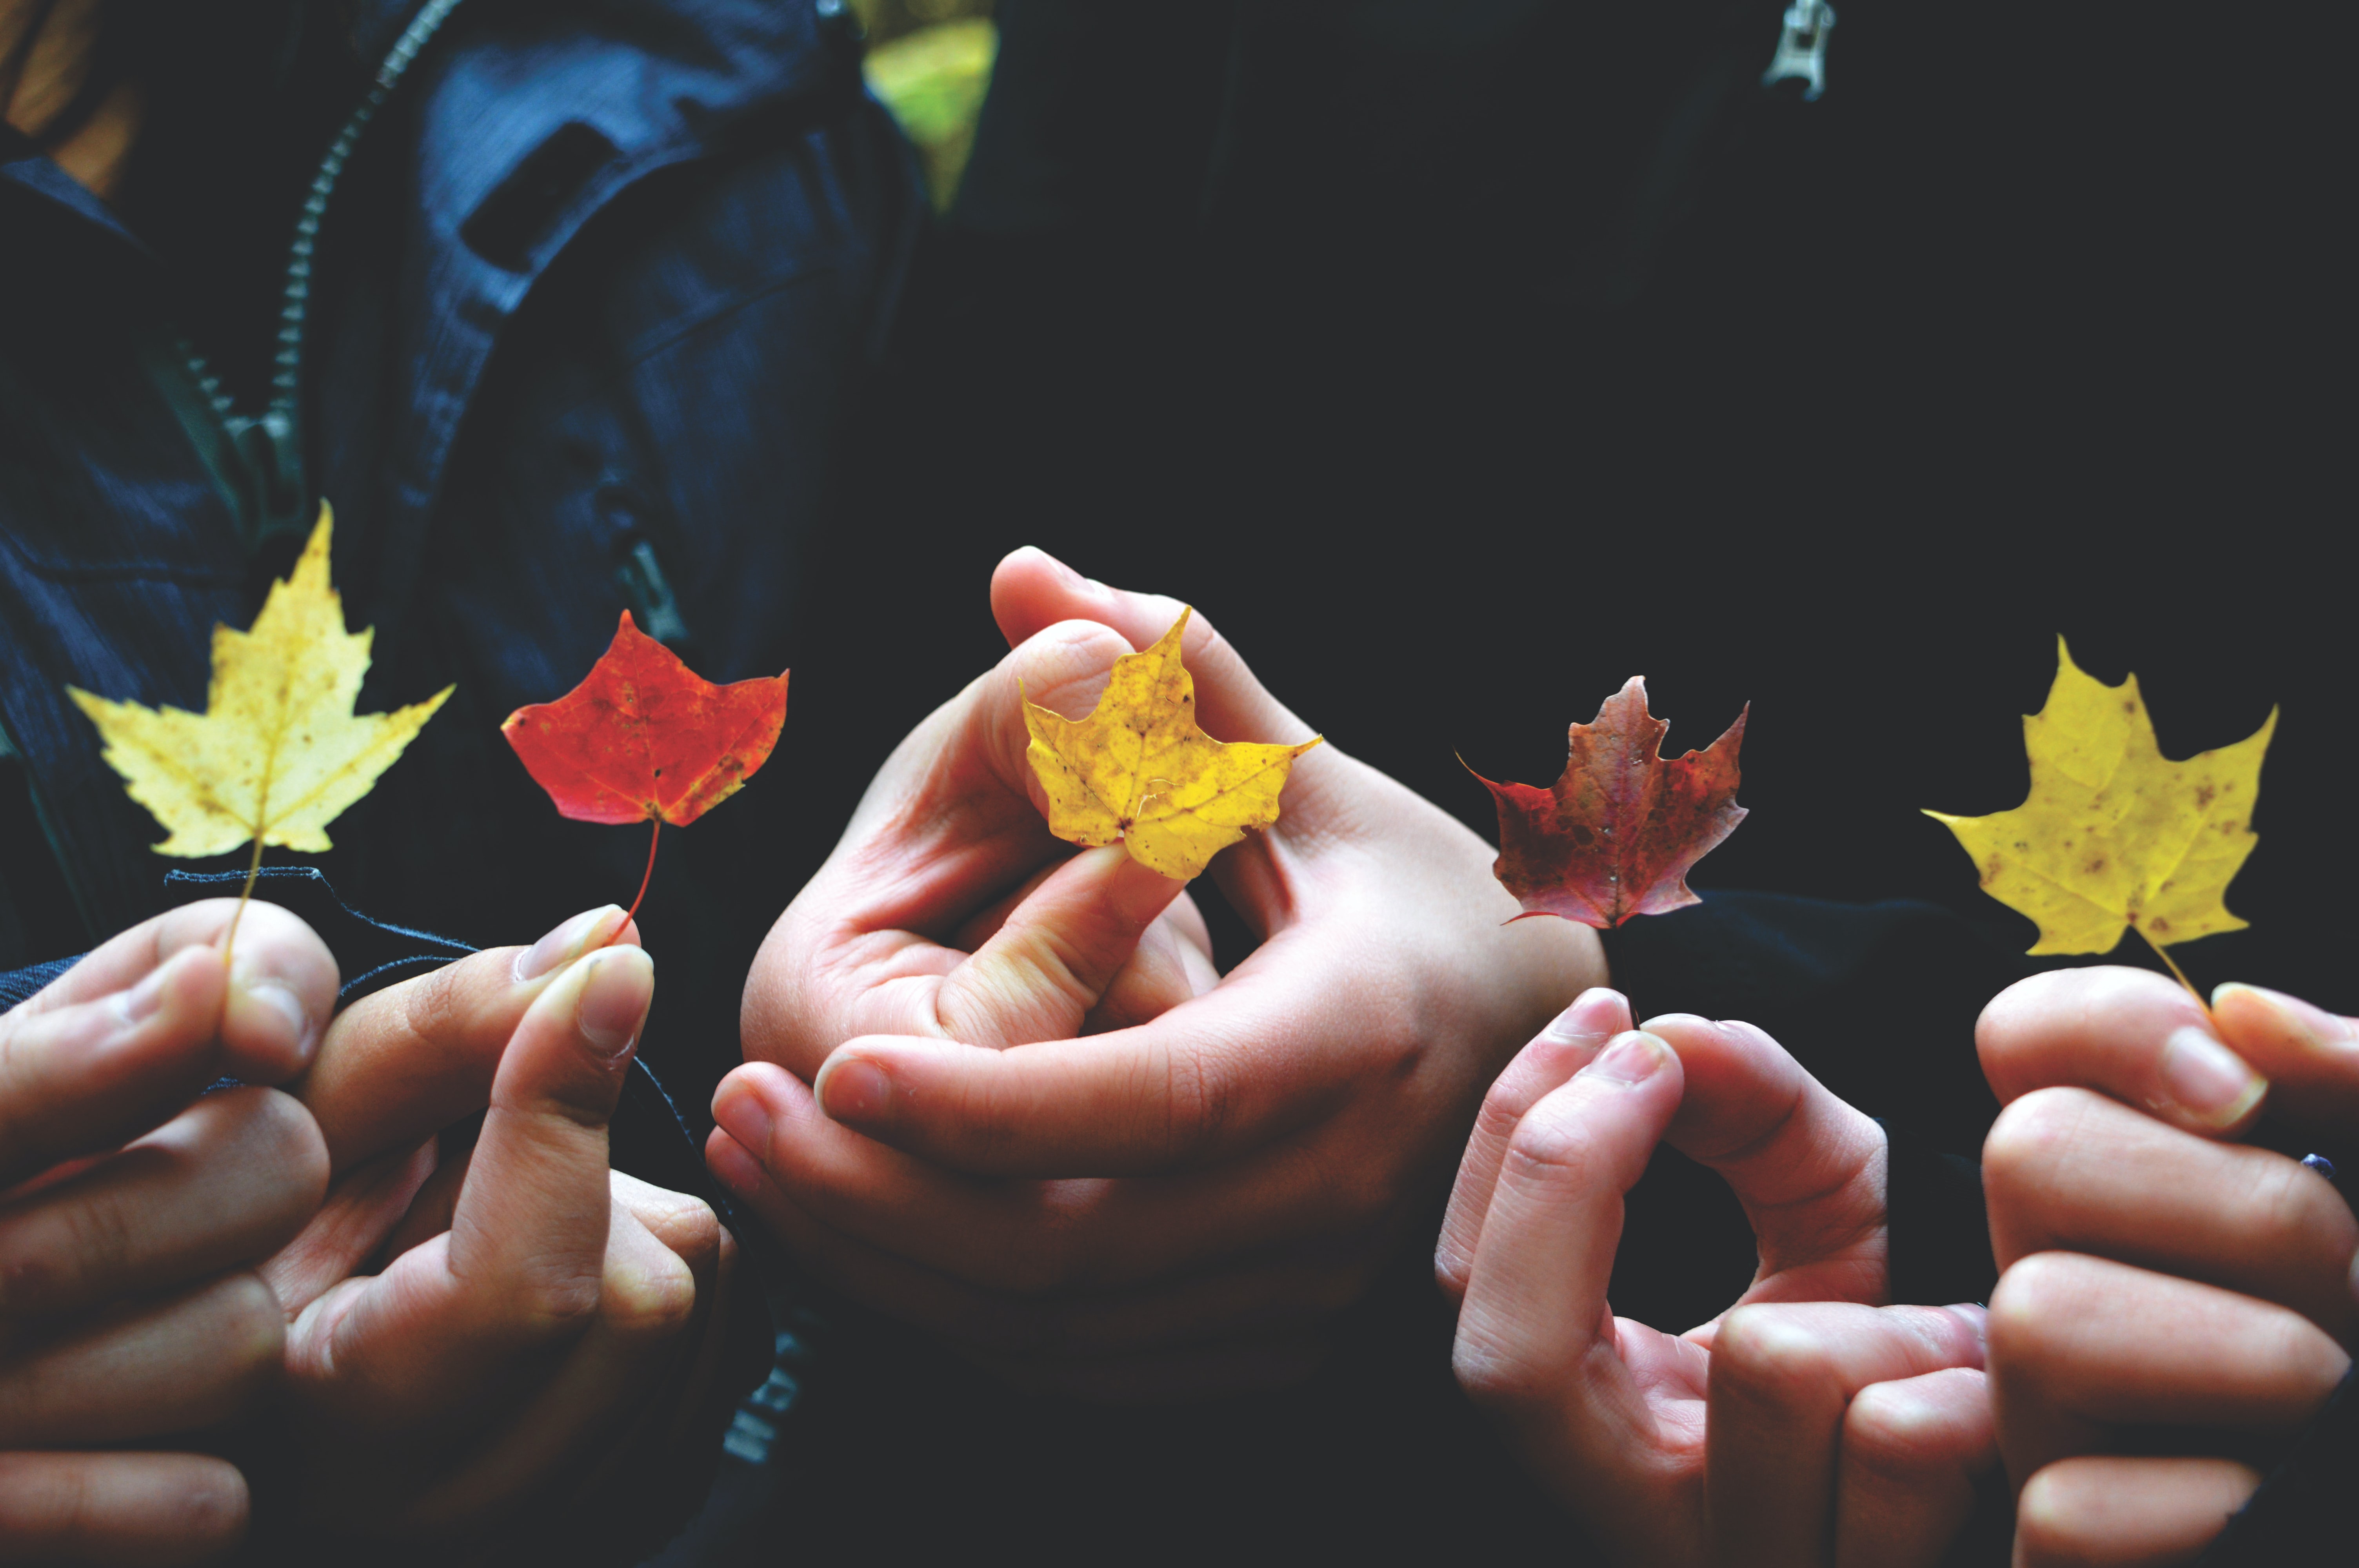 Children's hands holding multi-colored fall leaves